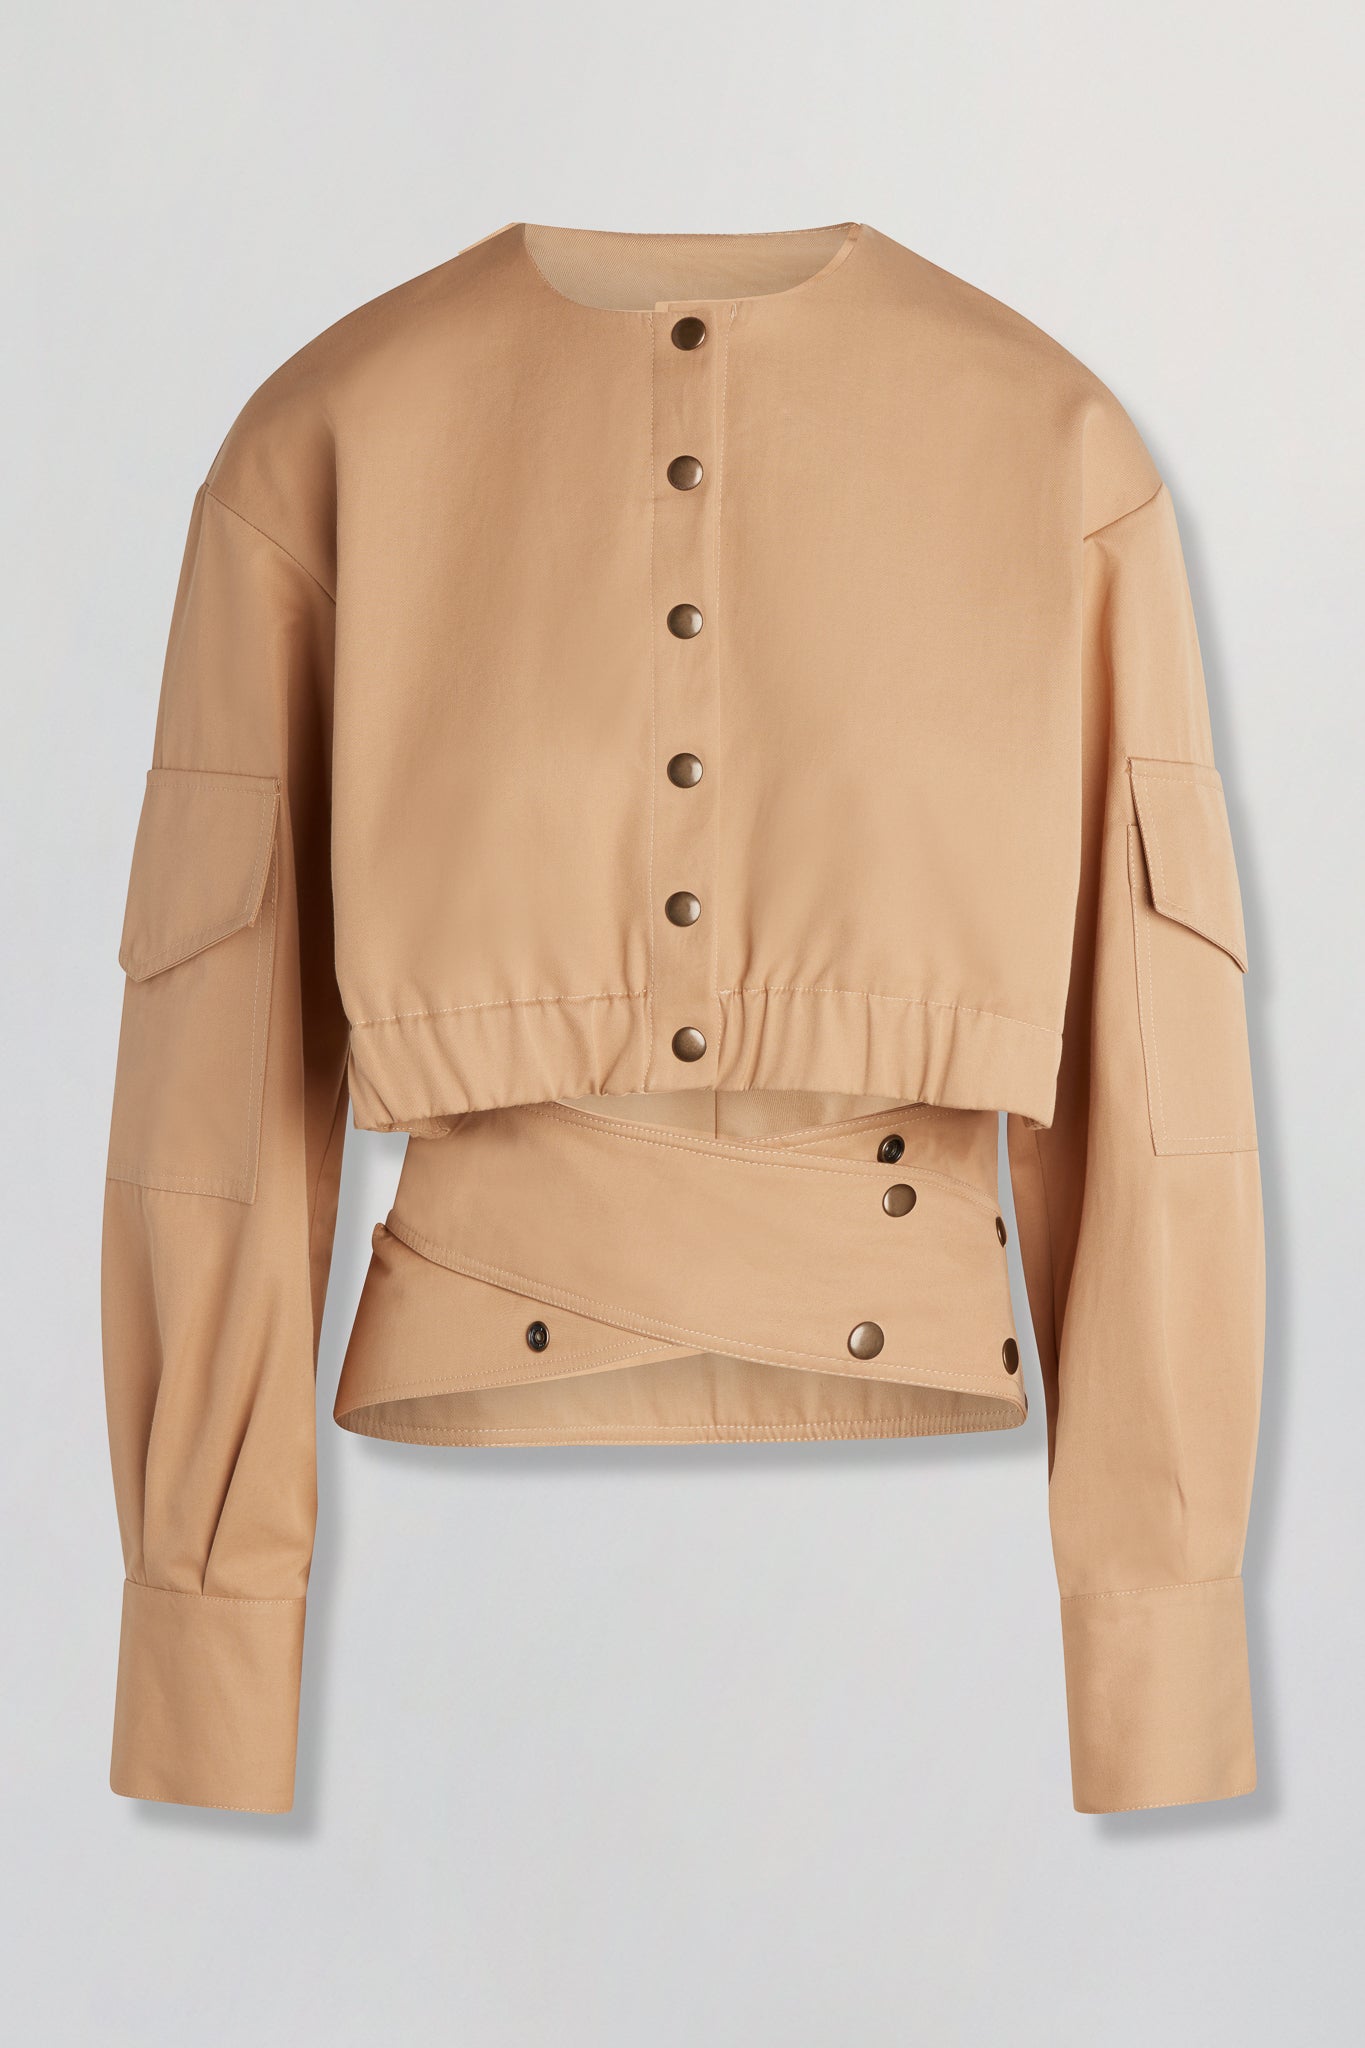 Cropped cargo jacket with wide crossover band in tan